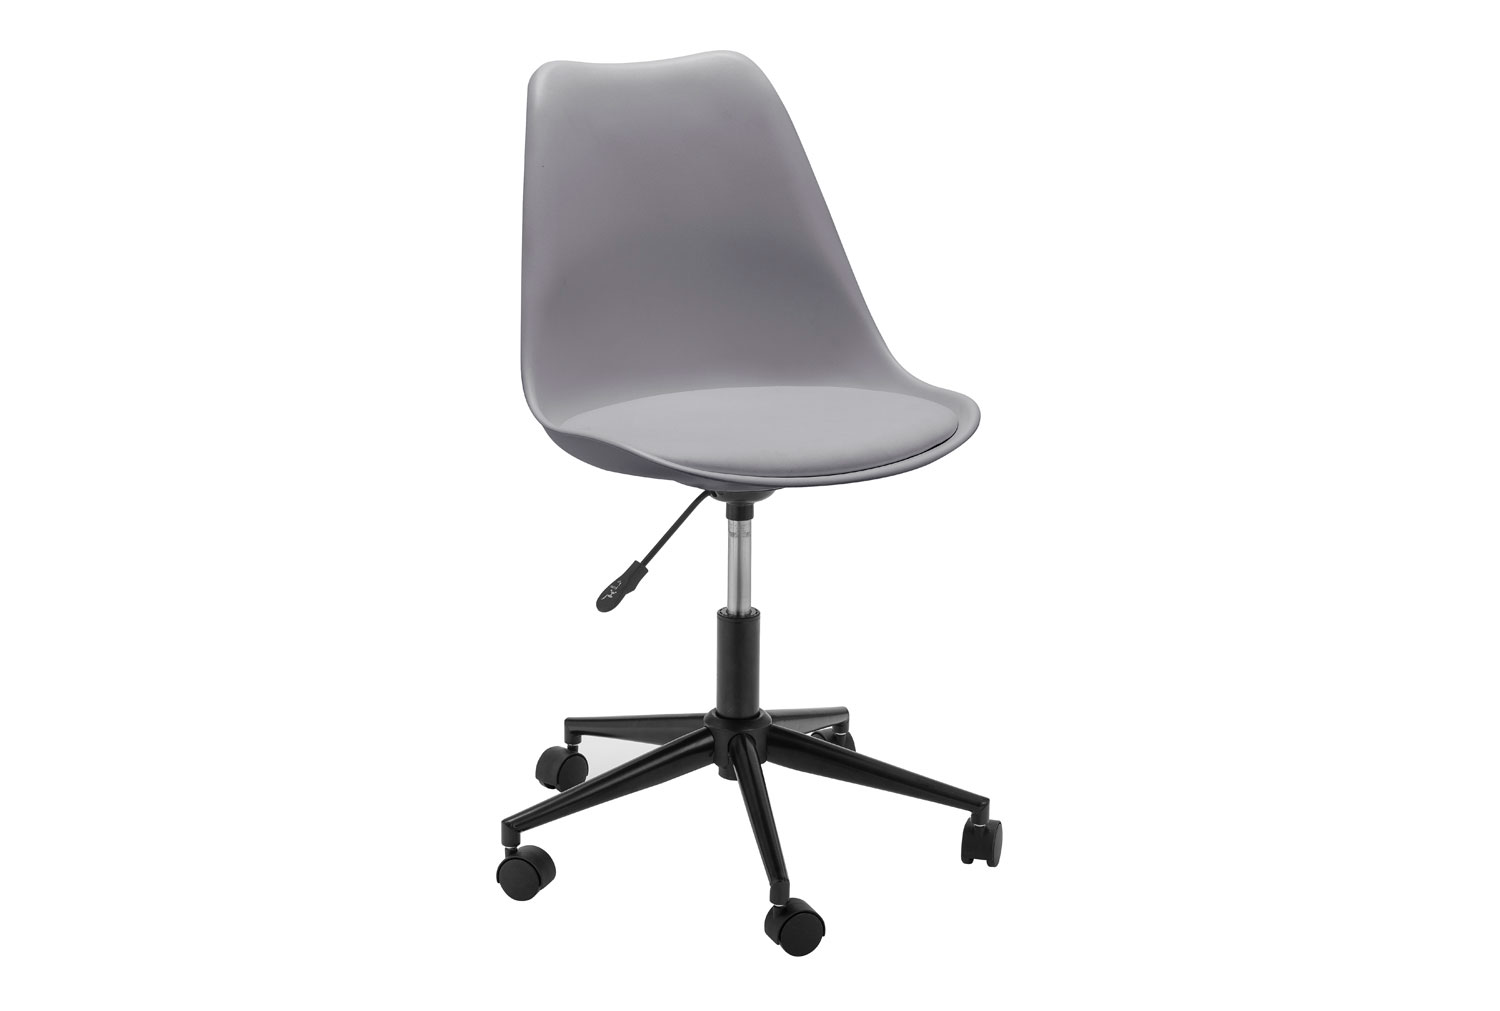 Denning Grey Office Chair with Black Base